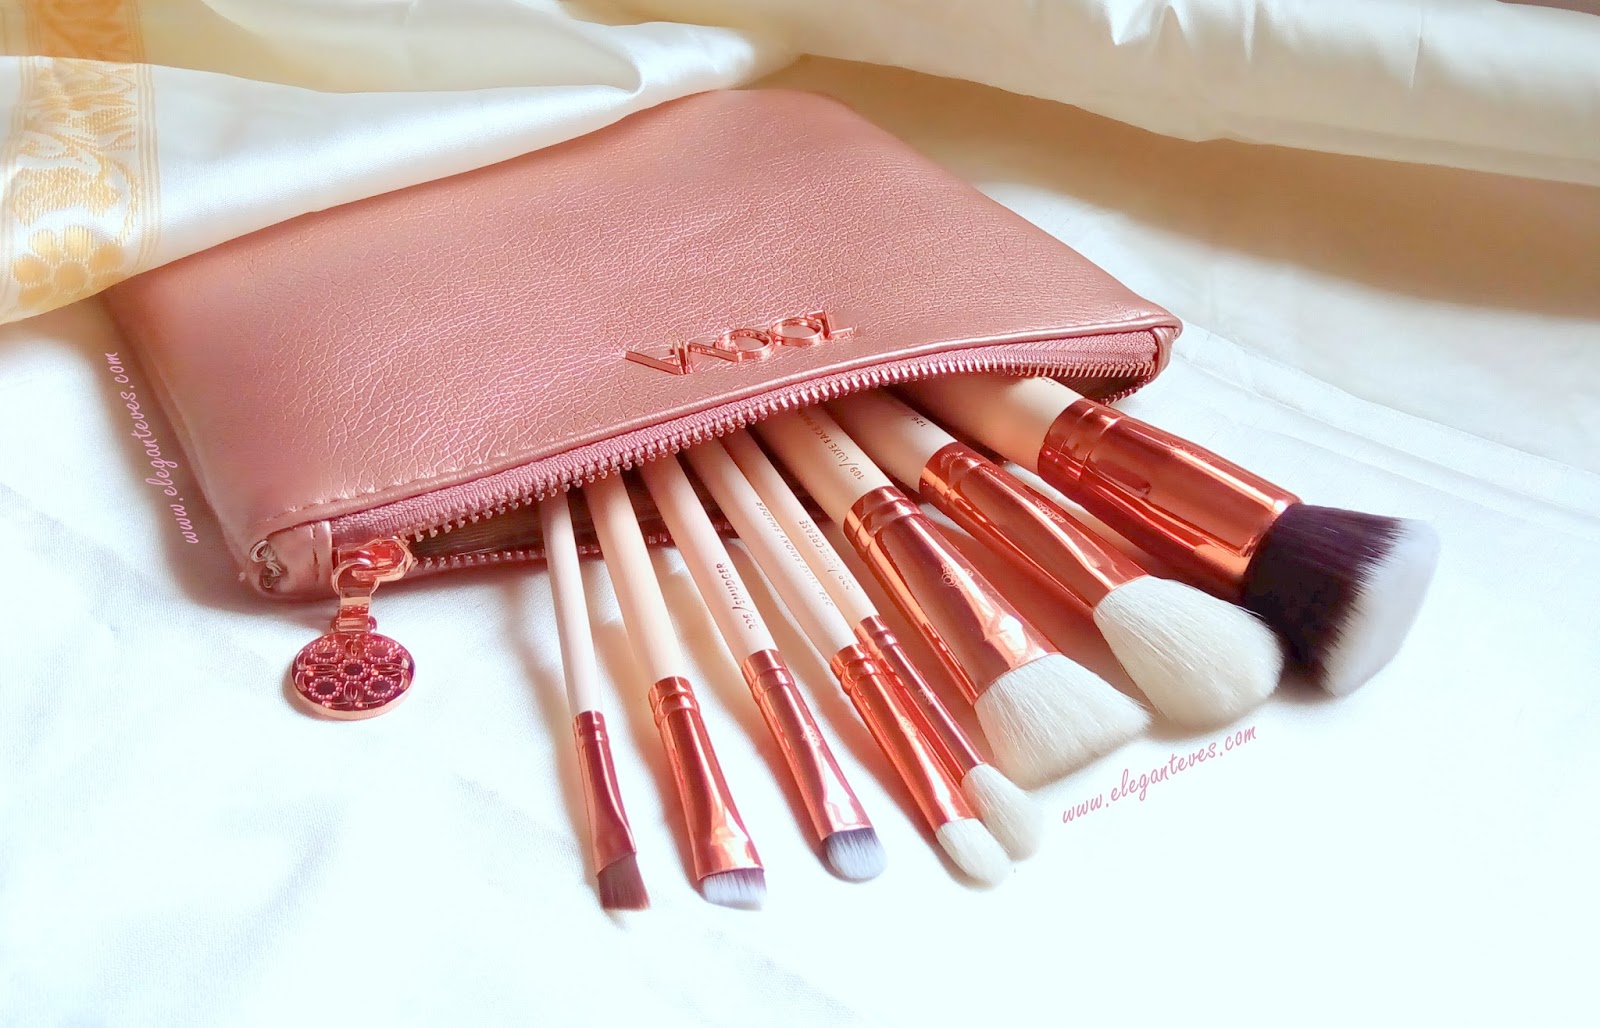 Review of Zoeva Rose Gold Brush Set Dupe from AliExpress - Elegant Eves